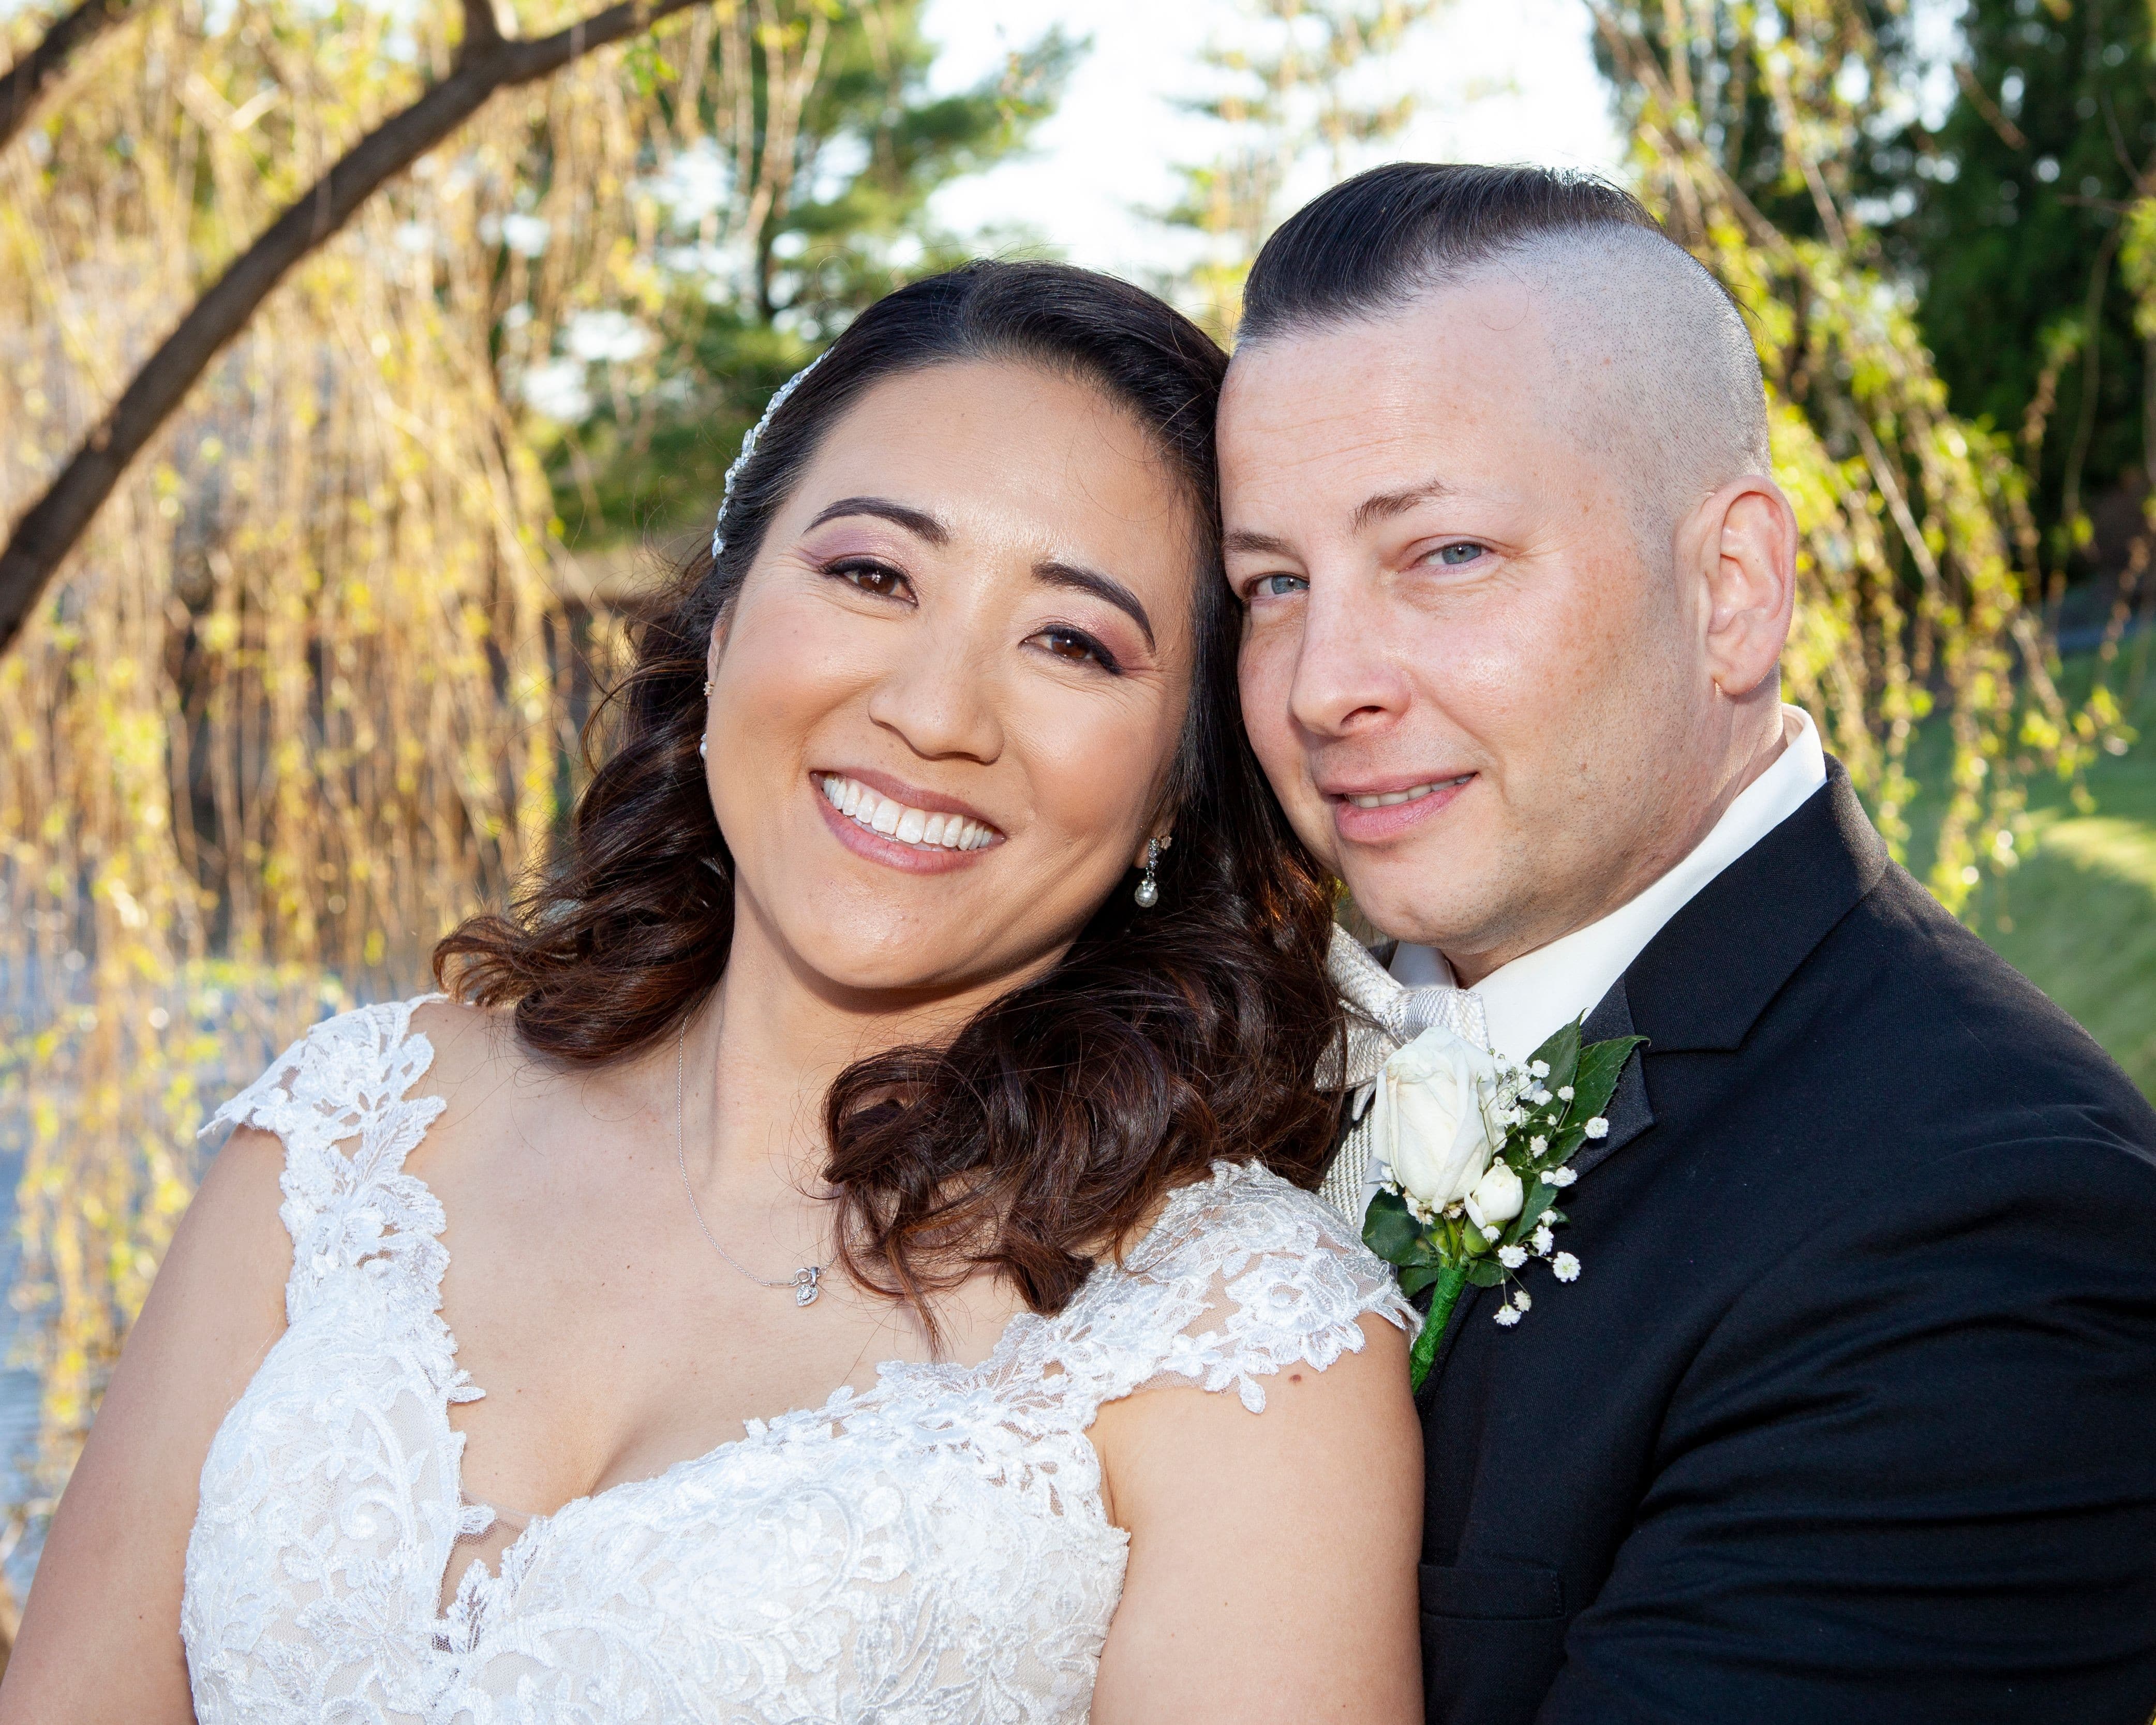 Wedding Photographers in Bucks County. Photography by Tylerstar Productions. Bride and Groom formal portraits at the Talamore in Ambler.